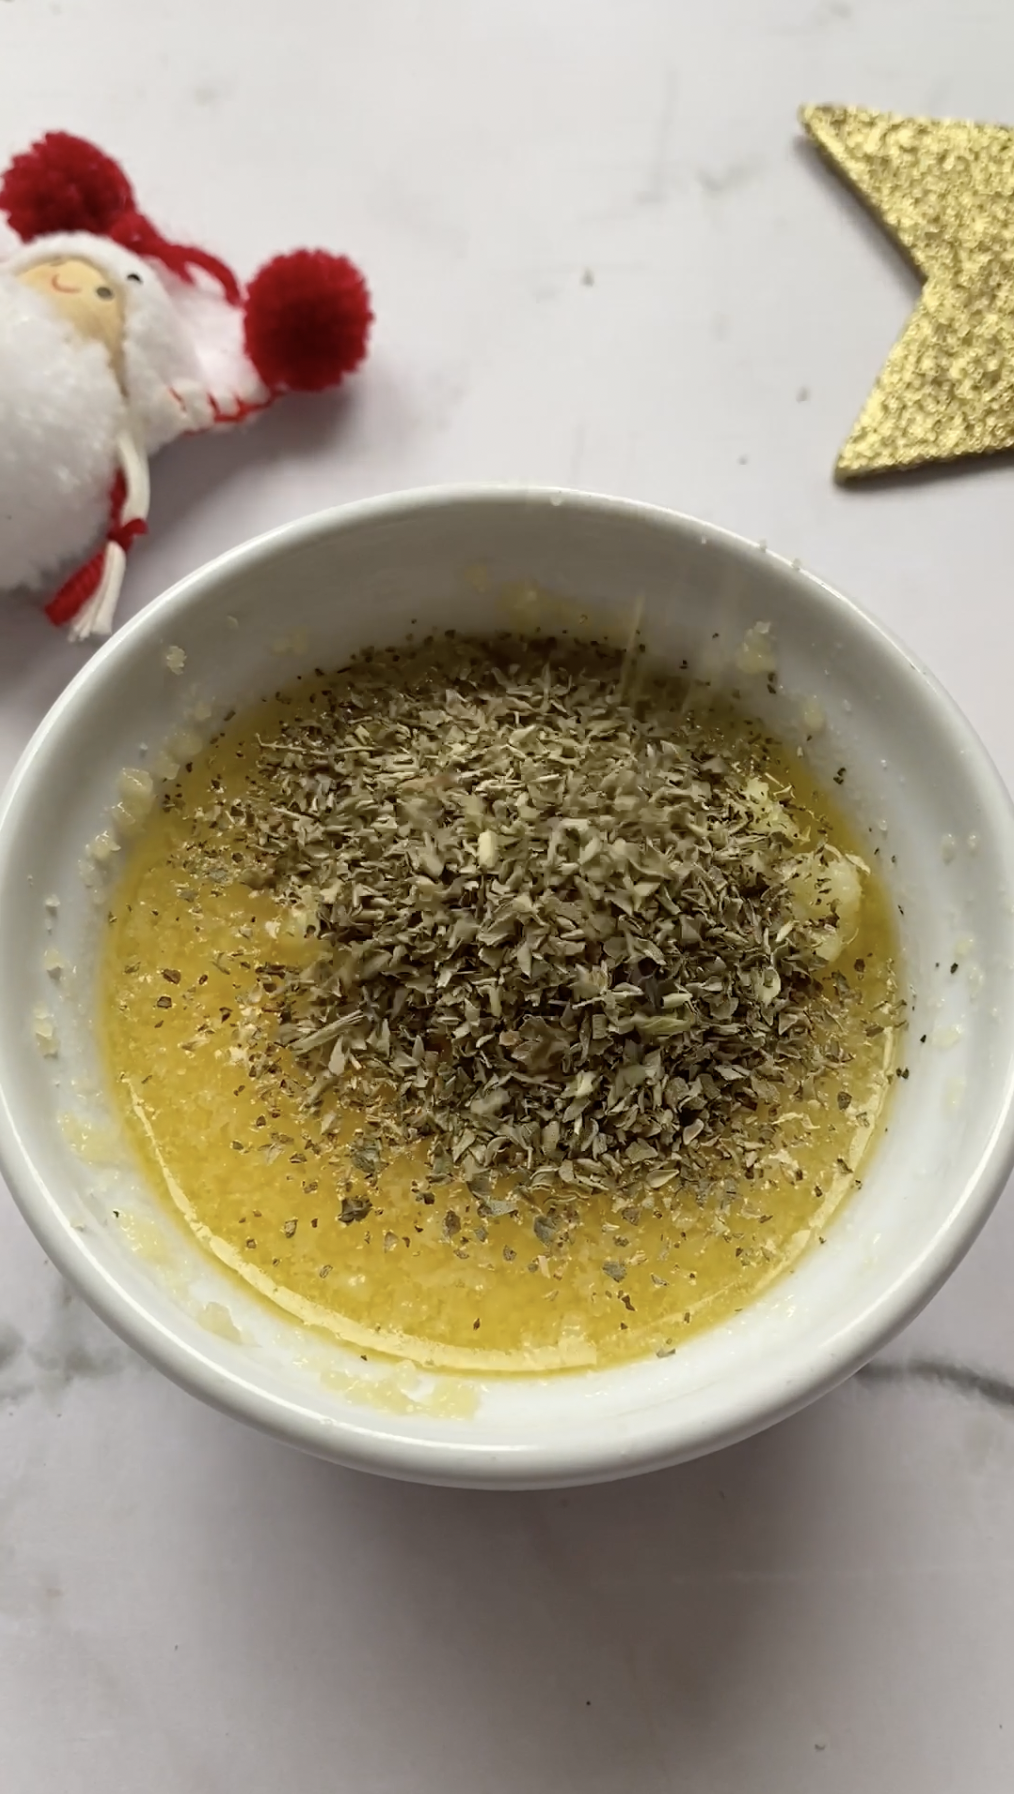 Oregano added to the bowl of melted butter.